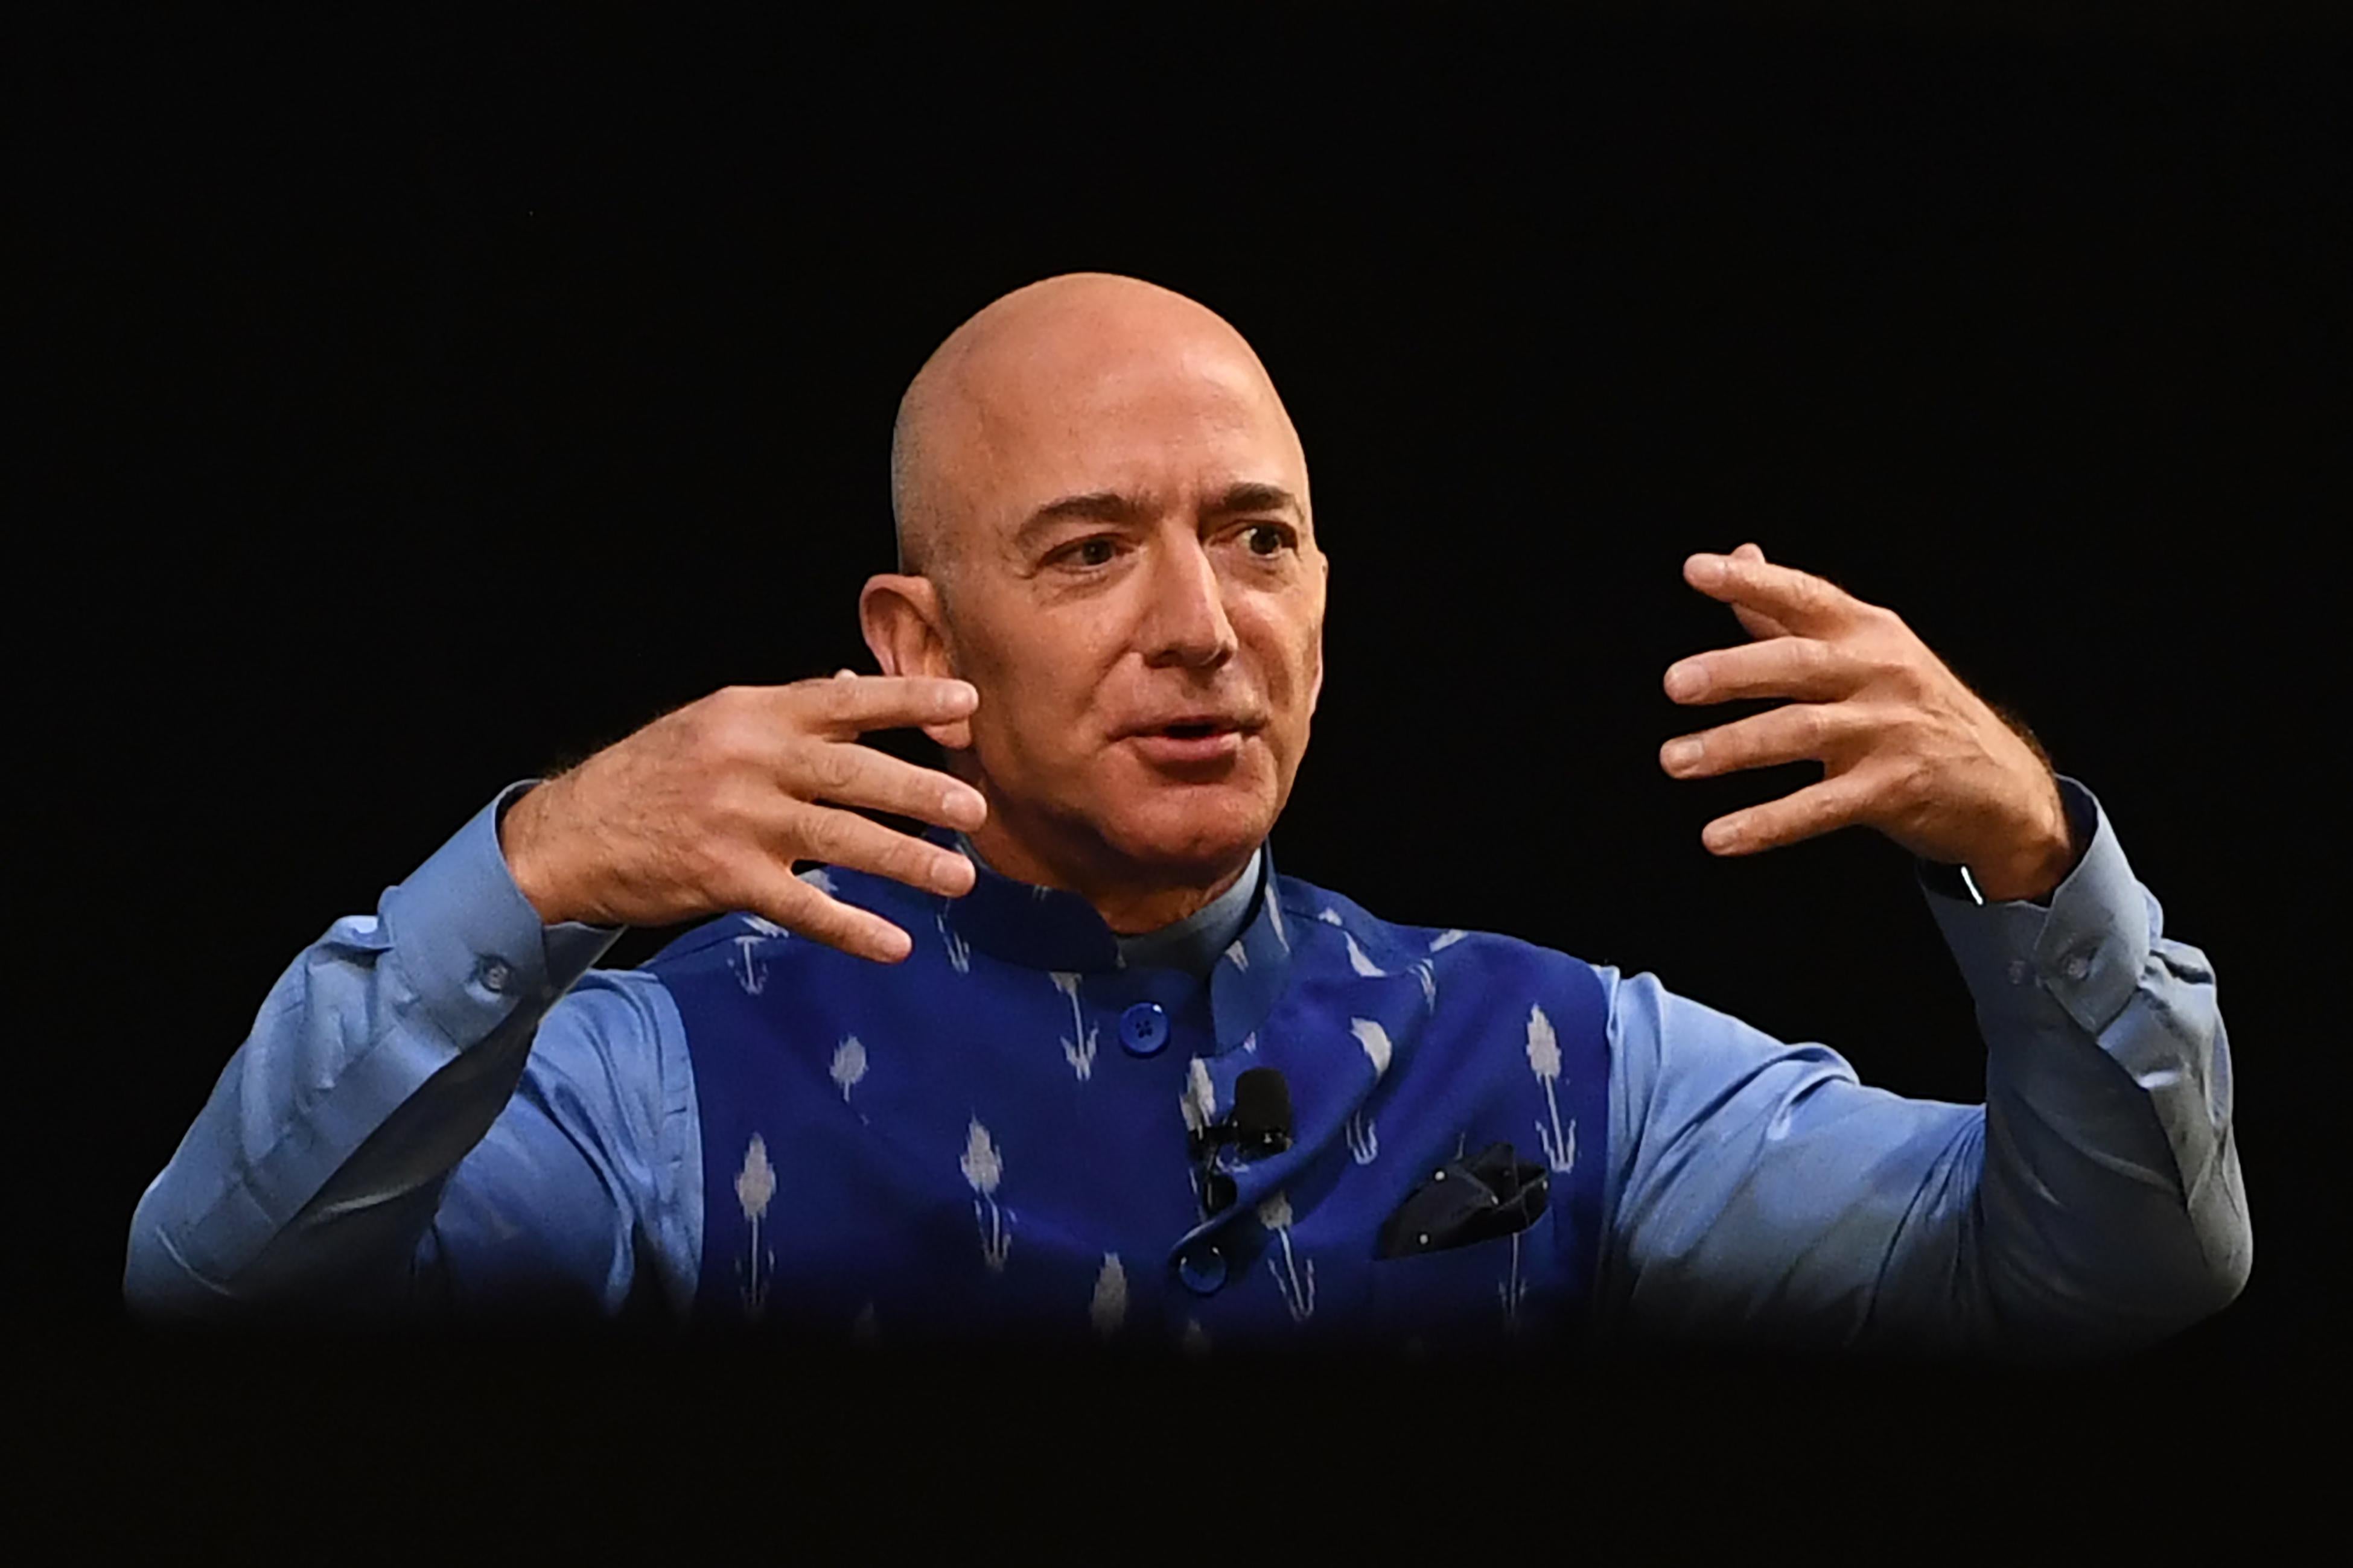 Jeff Bezos gestures with his arms raised against a black background.